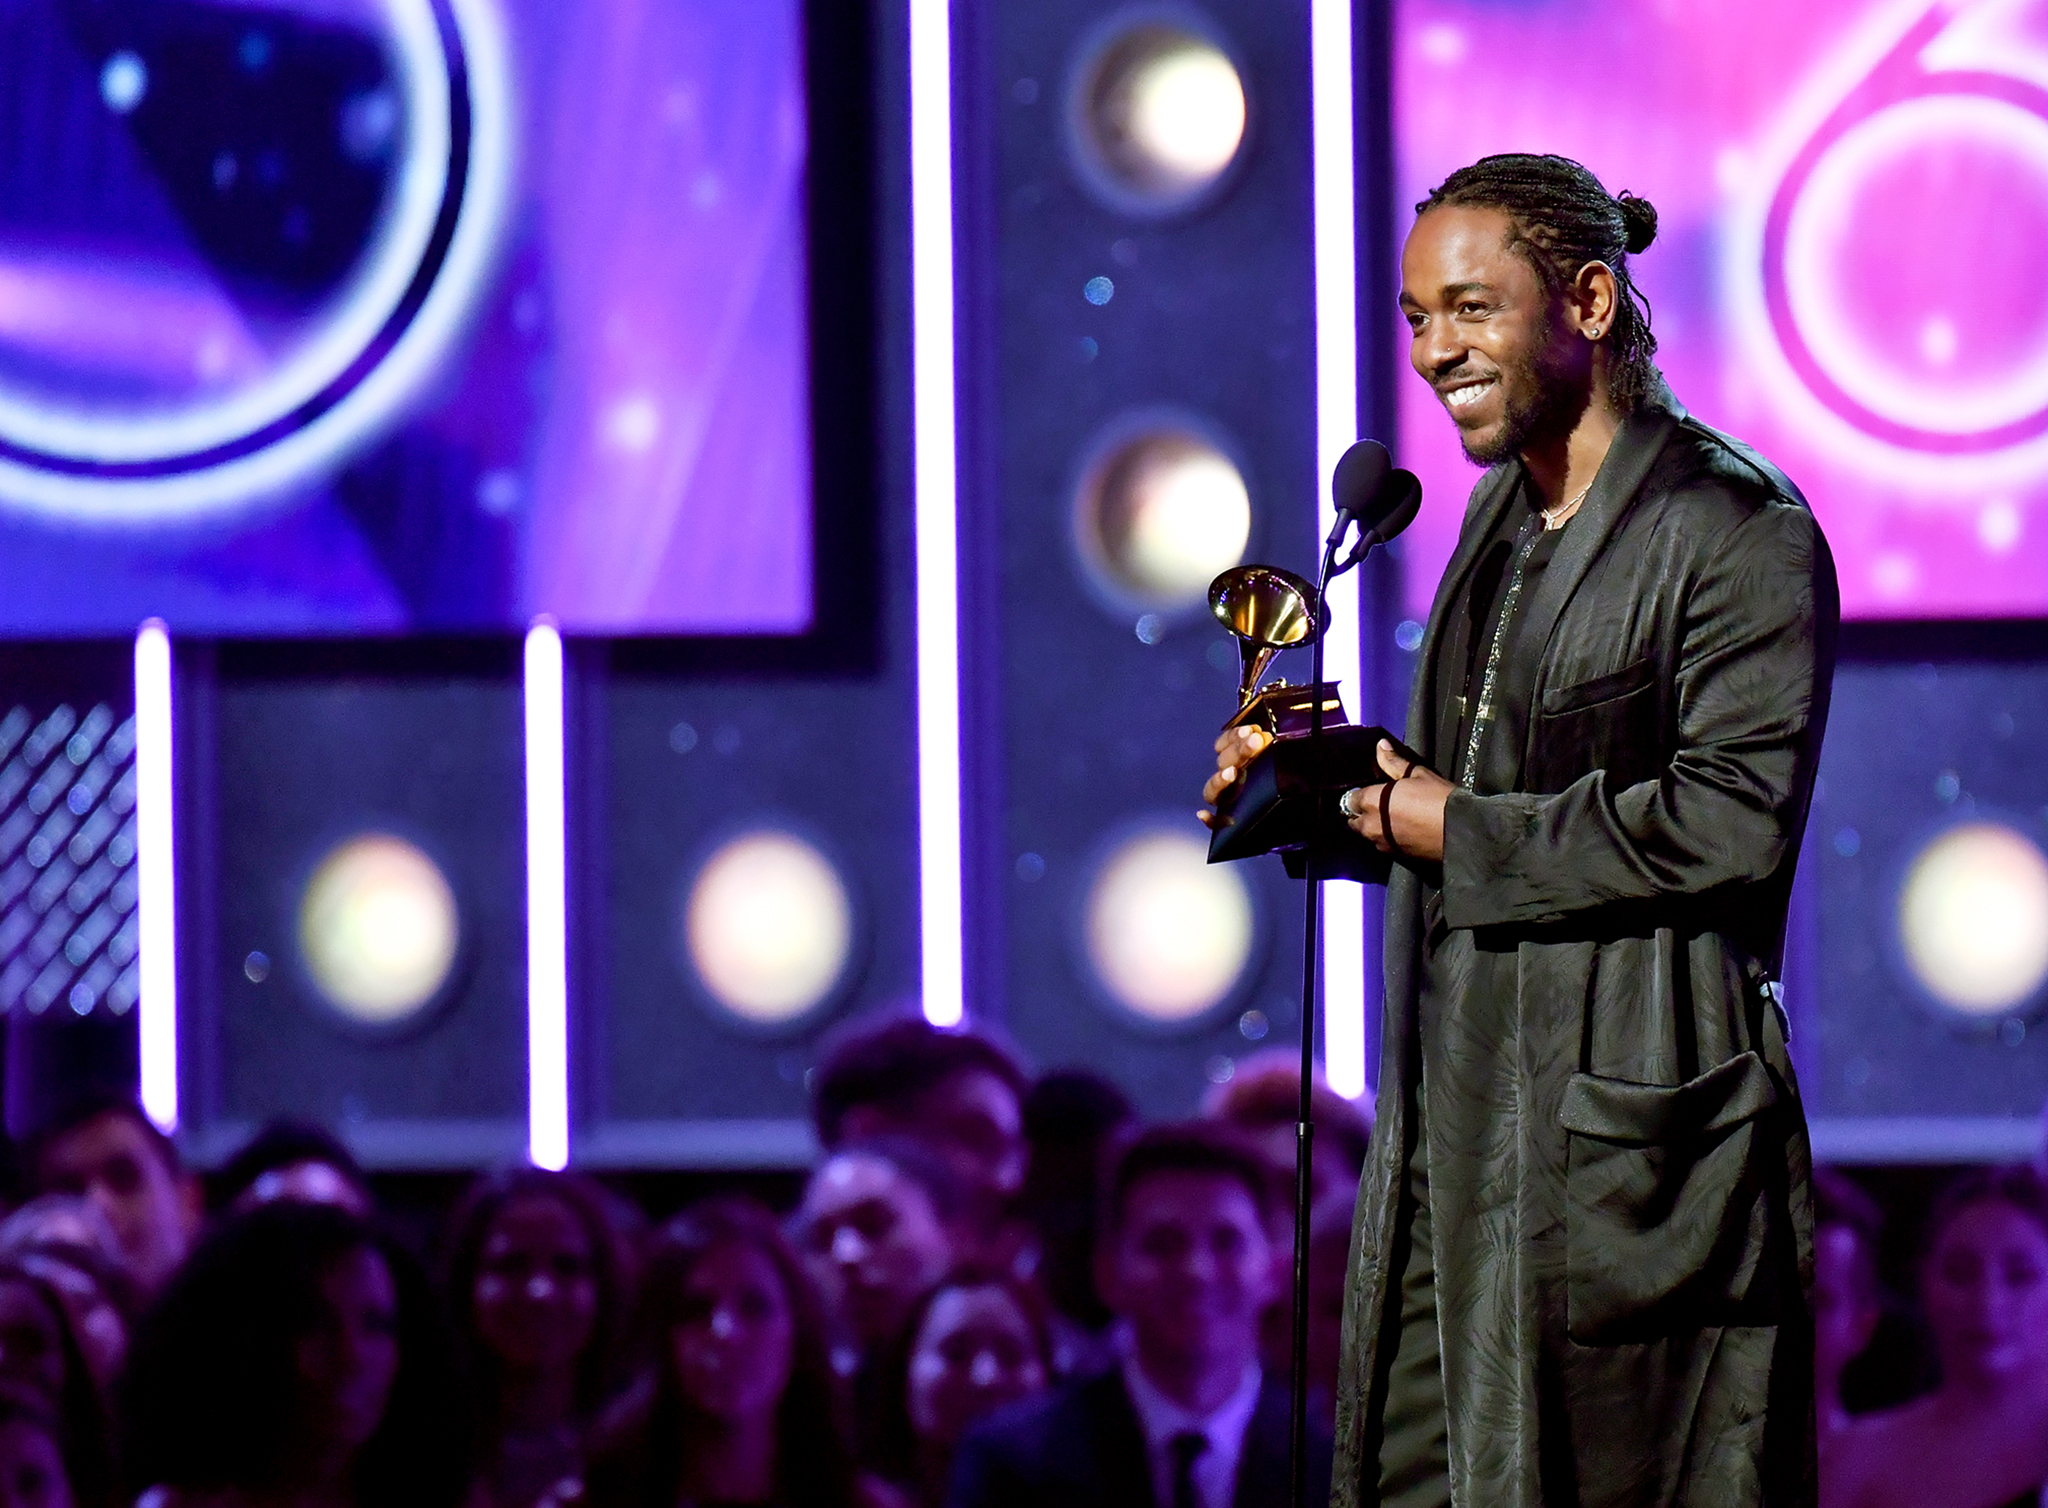 Recording artist Kendrick Lamar accepts award for Best Rap Album onstage during the 60th Annual Grammy Awards at Madison Square Garden on Jan. 28, 2018 in New York City. Jeff Kravitz—FilmMagic/Getty Images (Jeff Kravitz—FilmMagic/Getty Images)